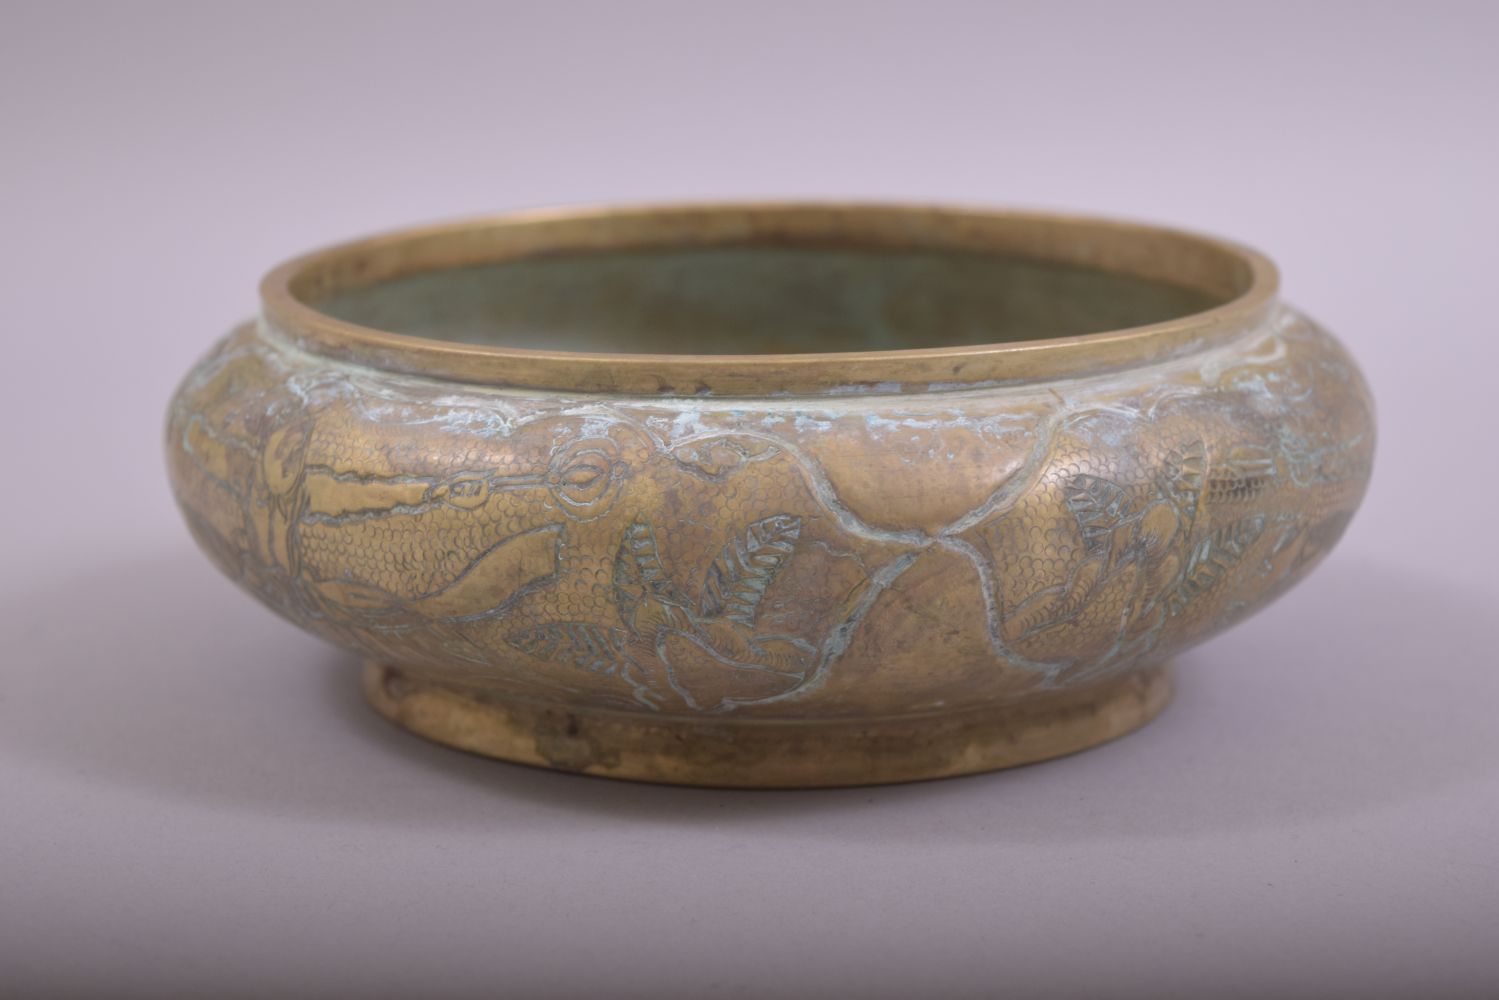 A CHINESE EMBOSSED AND CHASED BRONZE BOWL, with scenes of men on horseback in outdoor settings, - Image 3 of 7